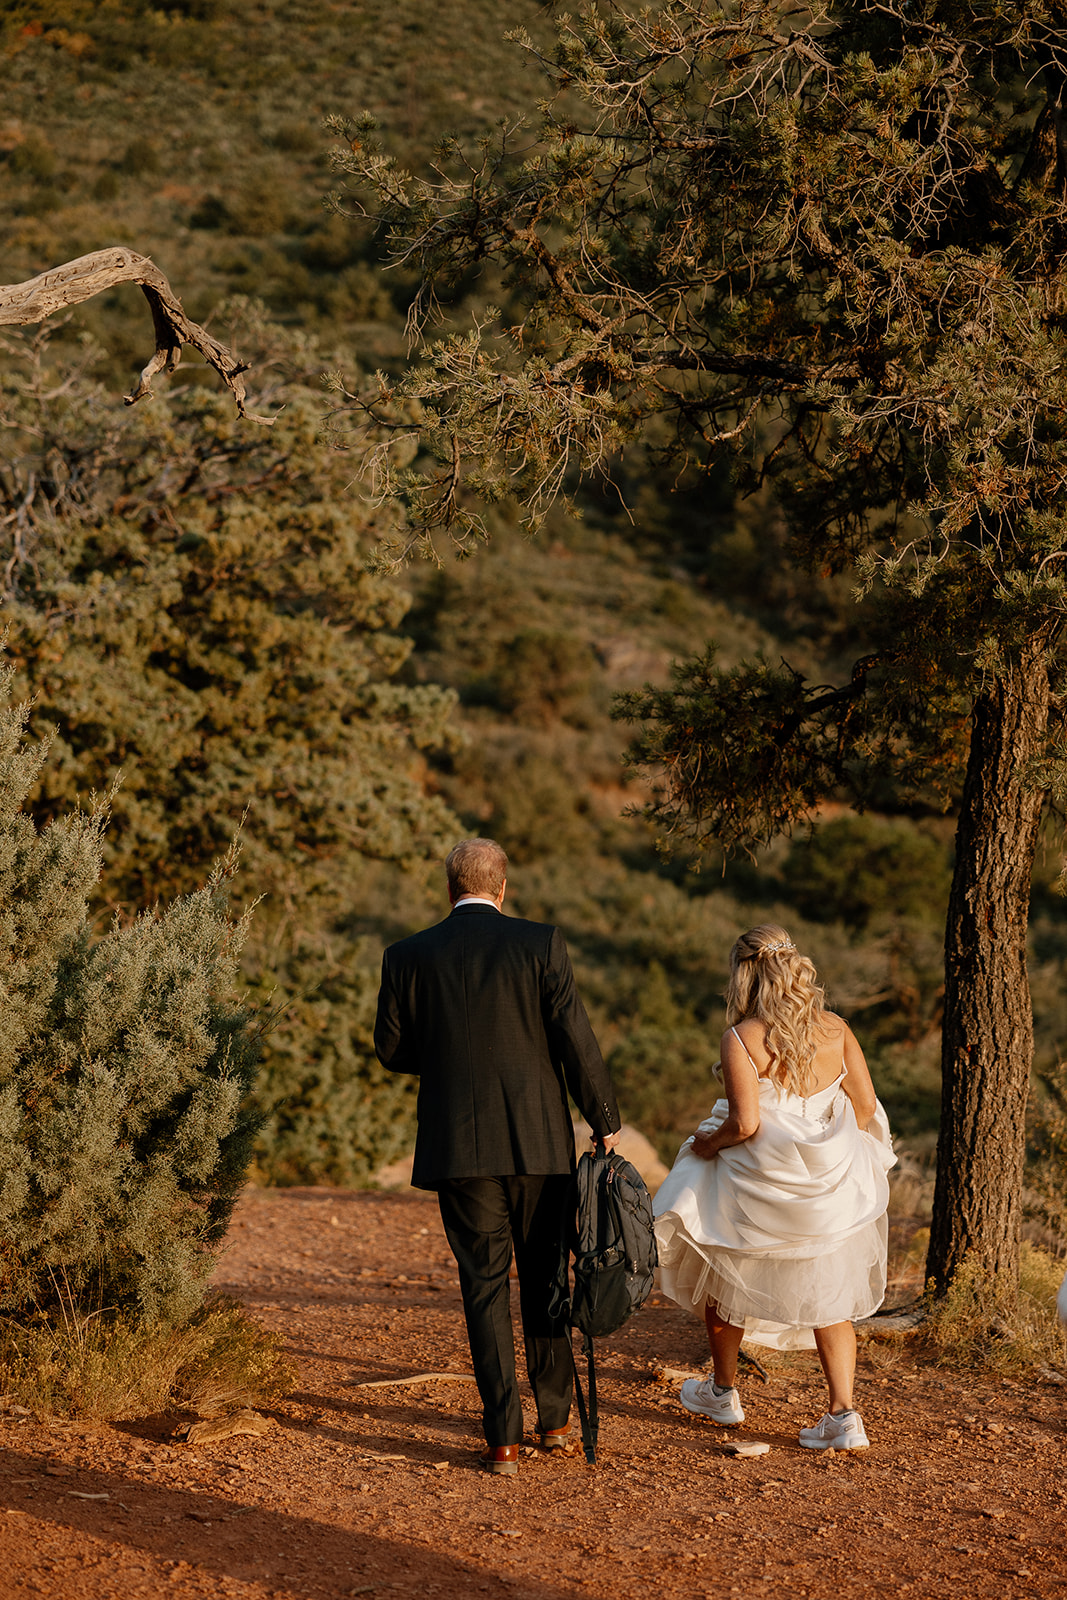 bride and groom walk into the sunset together after their dreamy Arizona wedding ceremony